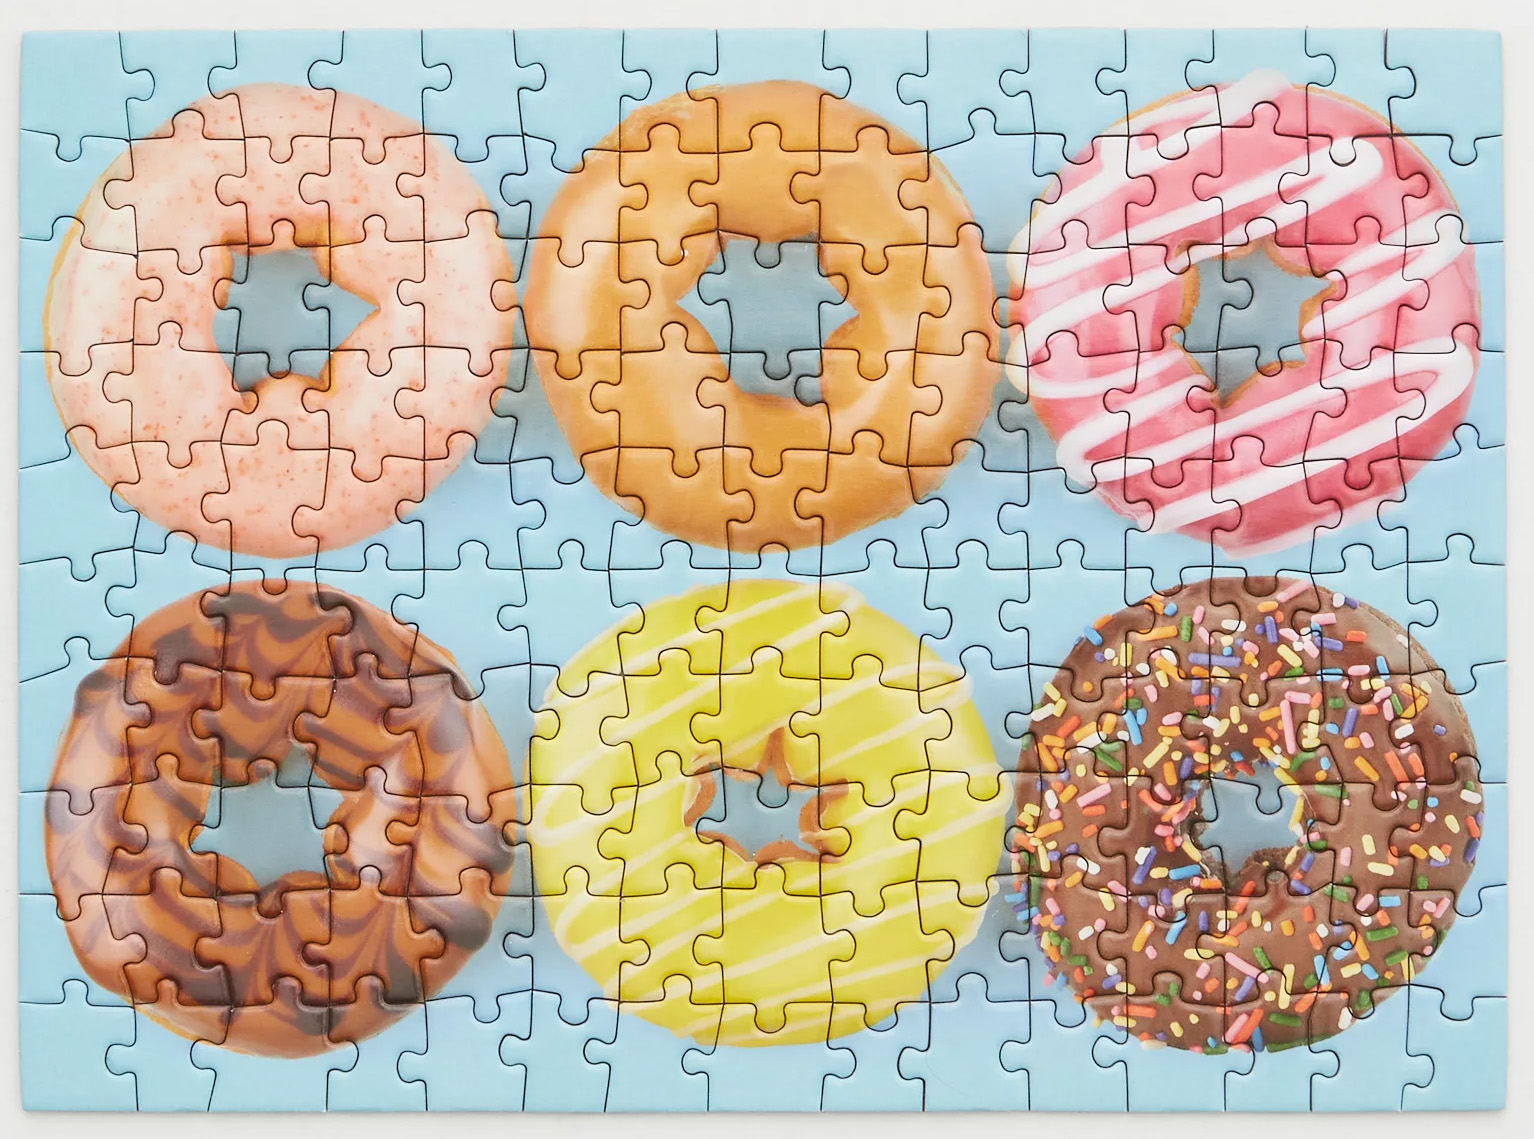 A Little Something Donuts Mini Puzzle Collage Jigsaw Puzzle